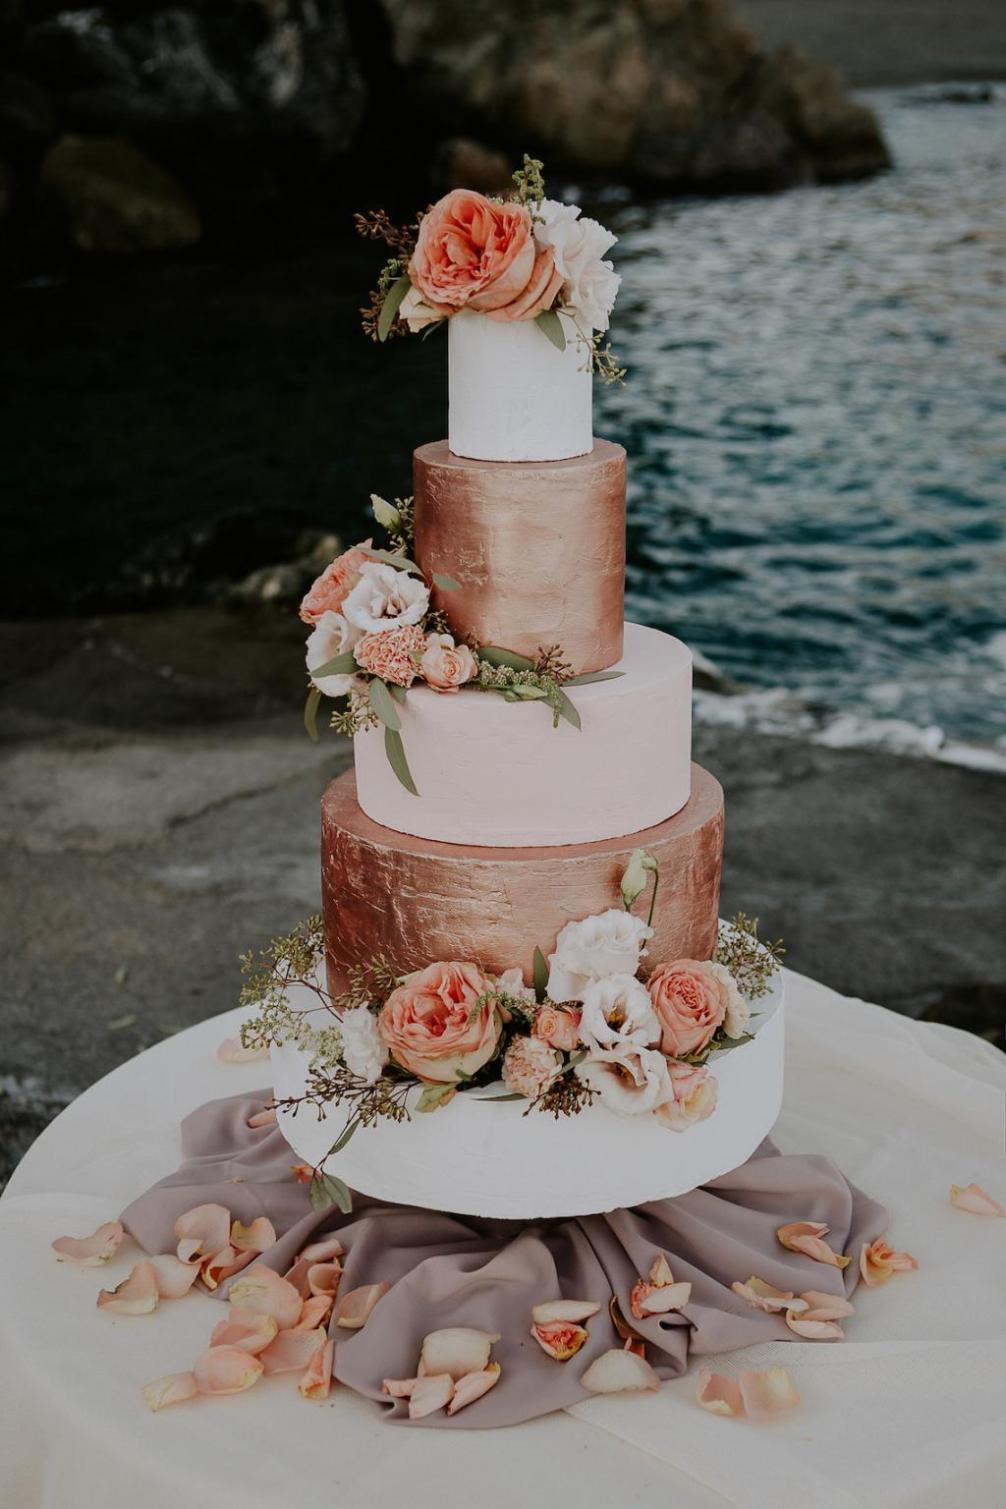 What are Some Fun and Creative Ways to Serve Wedding Cake?